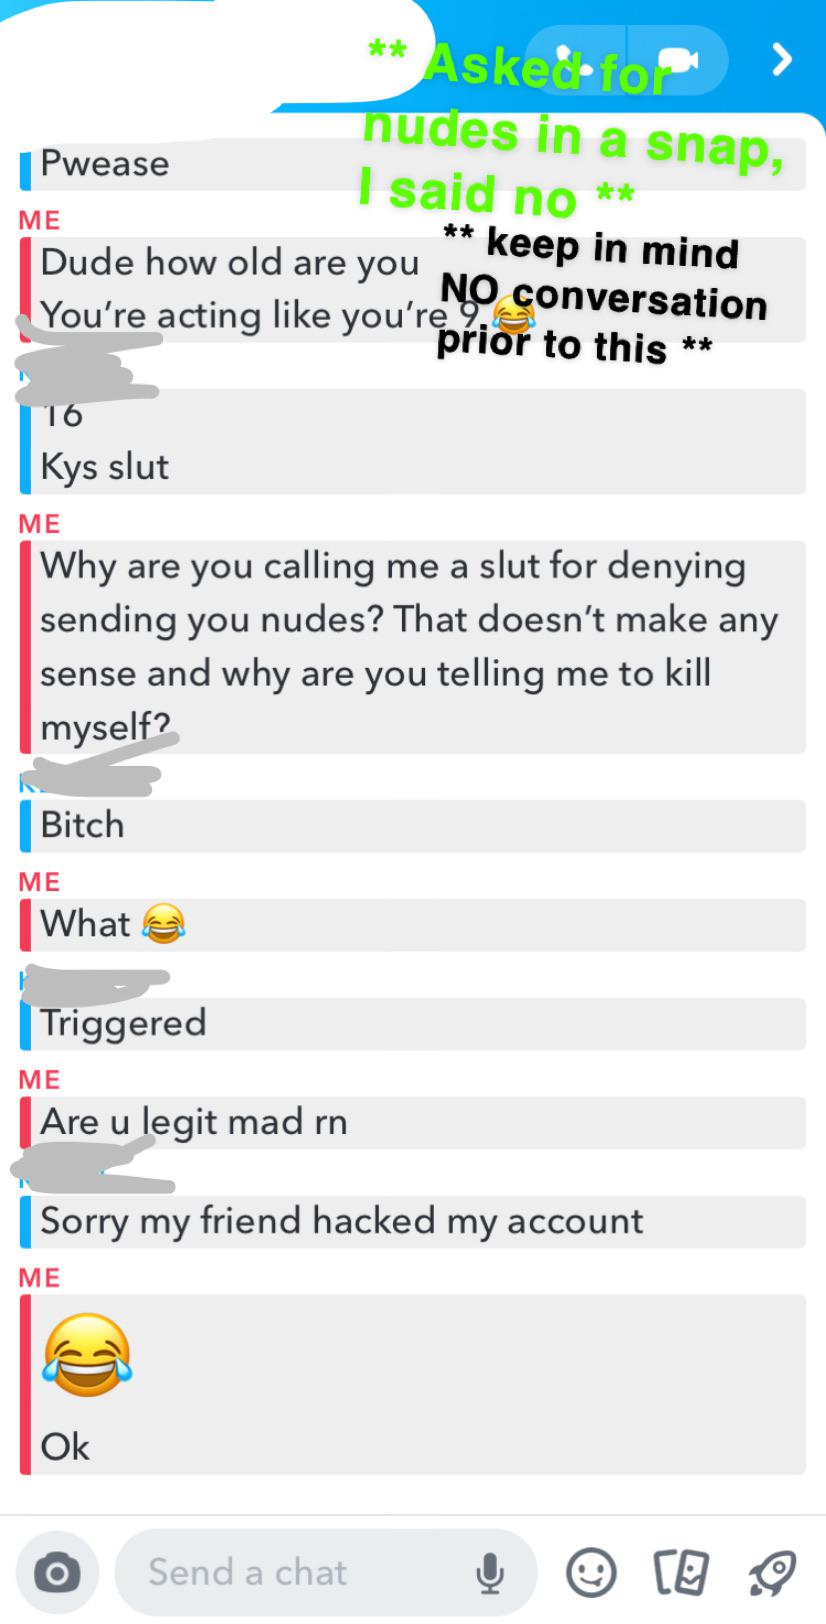 web page - Aske. > nudes in a snap, Pwease I said no Me keep in mind Dude how old are you No conversation You're acting you rerior to this 16 Kys slut Me Why are you calling me a slut for denying sending you nudes? That doesn't make any sense and why are 